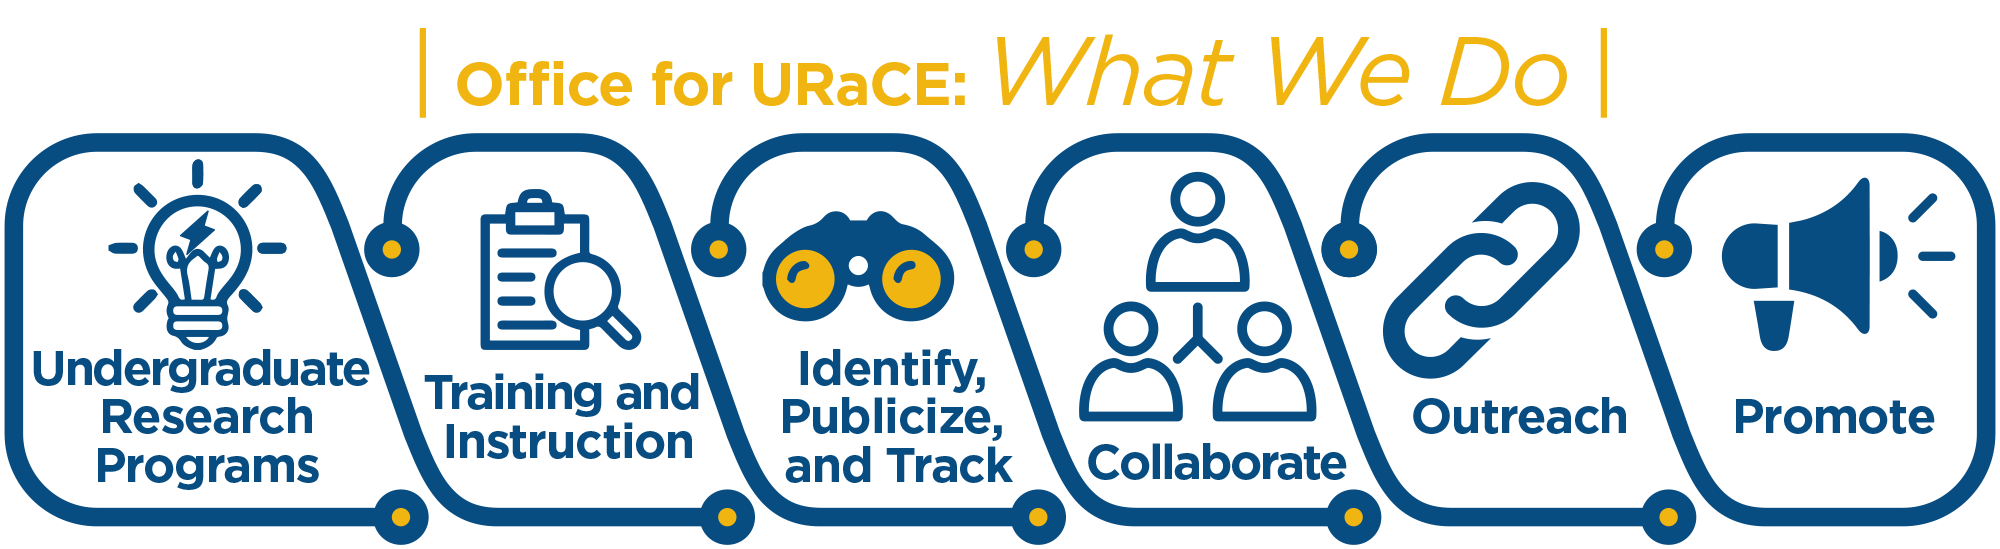 Office for URaCE: What We Do